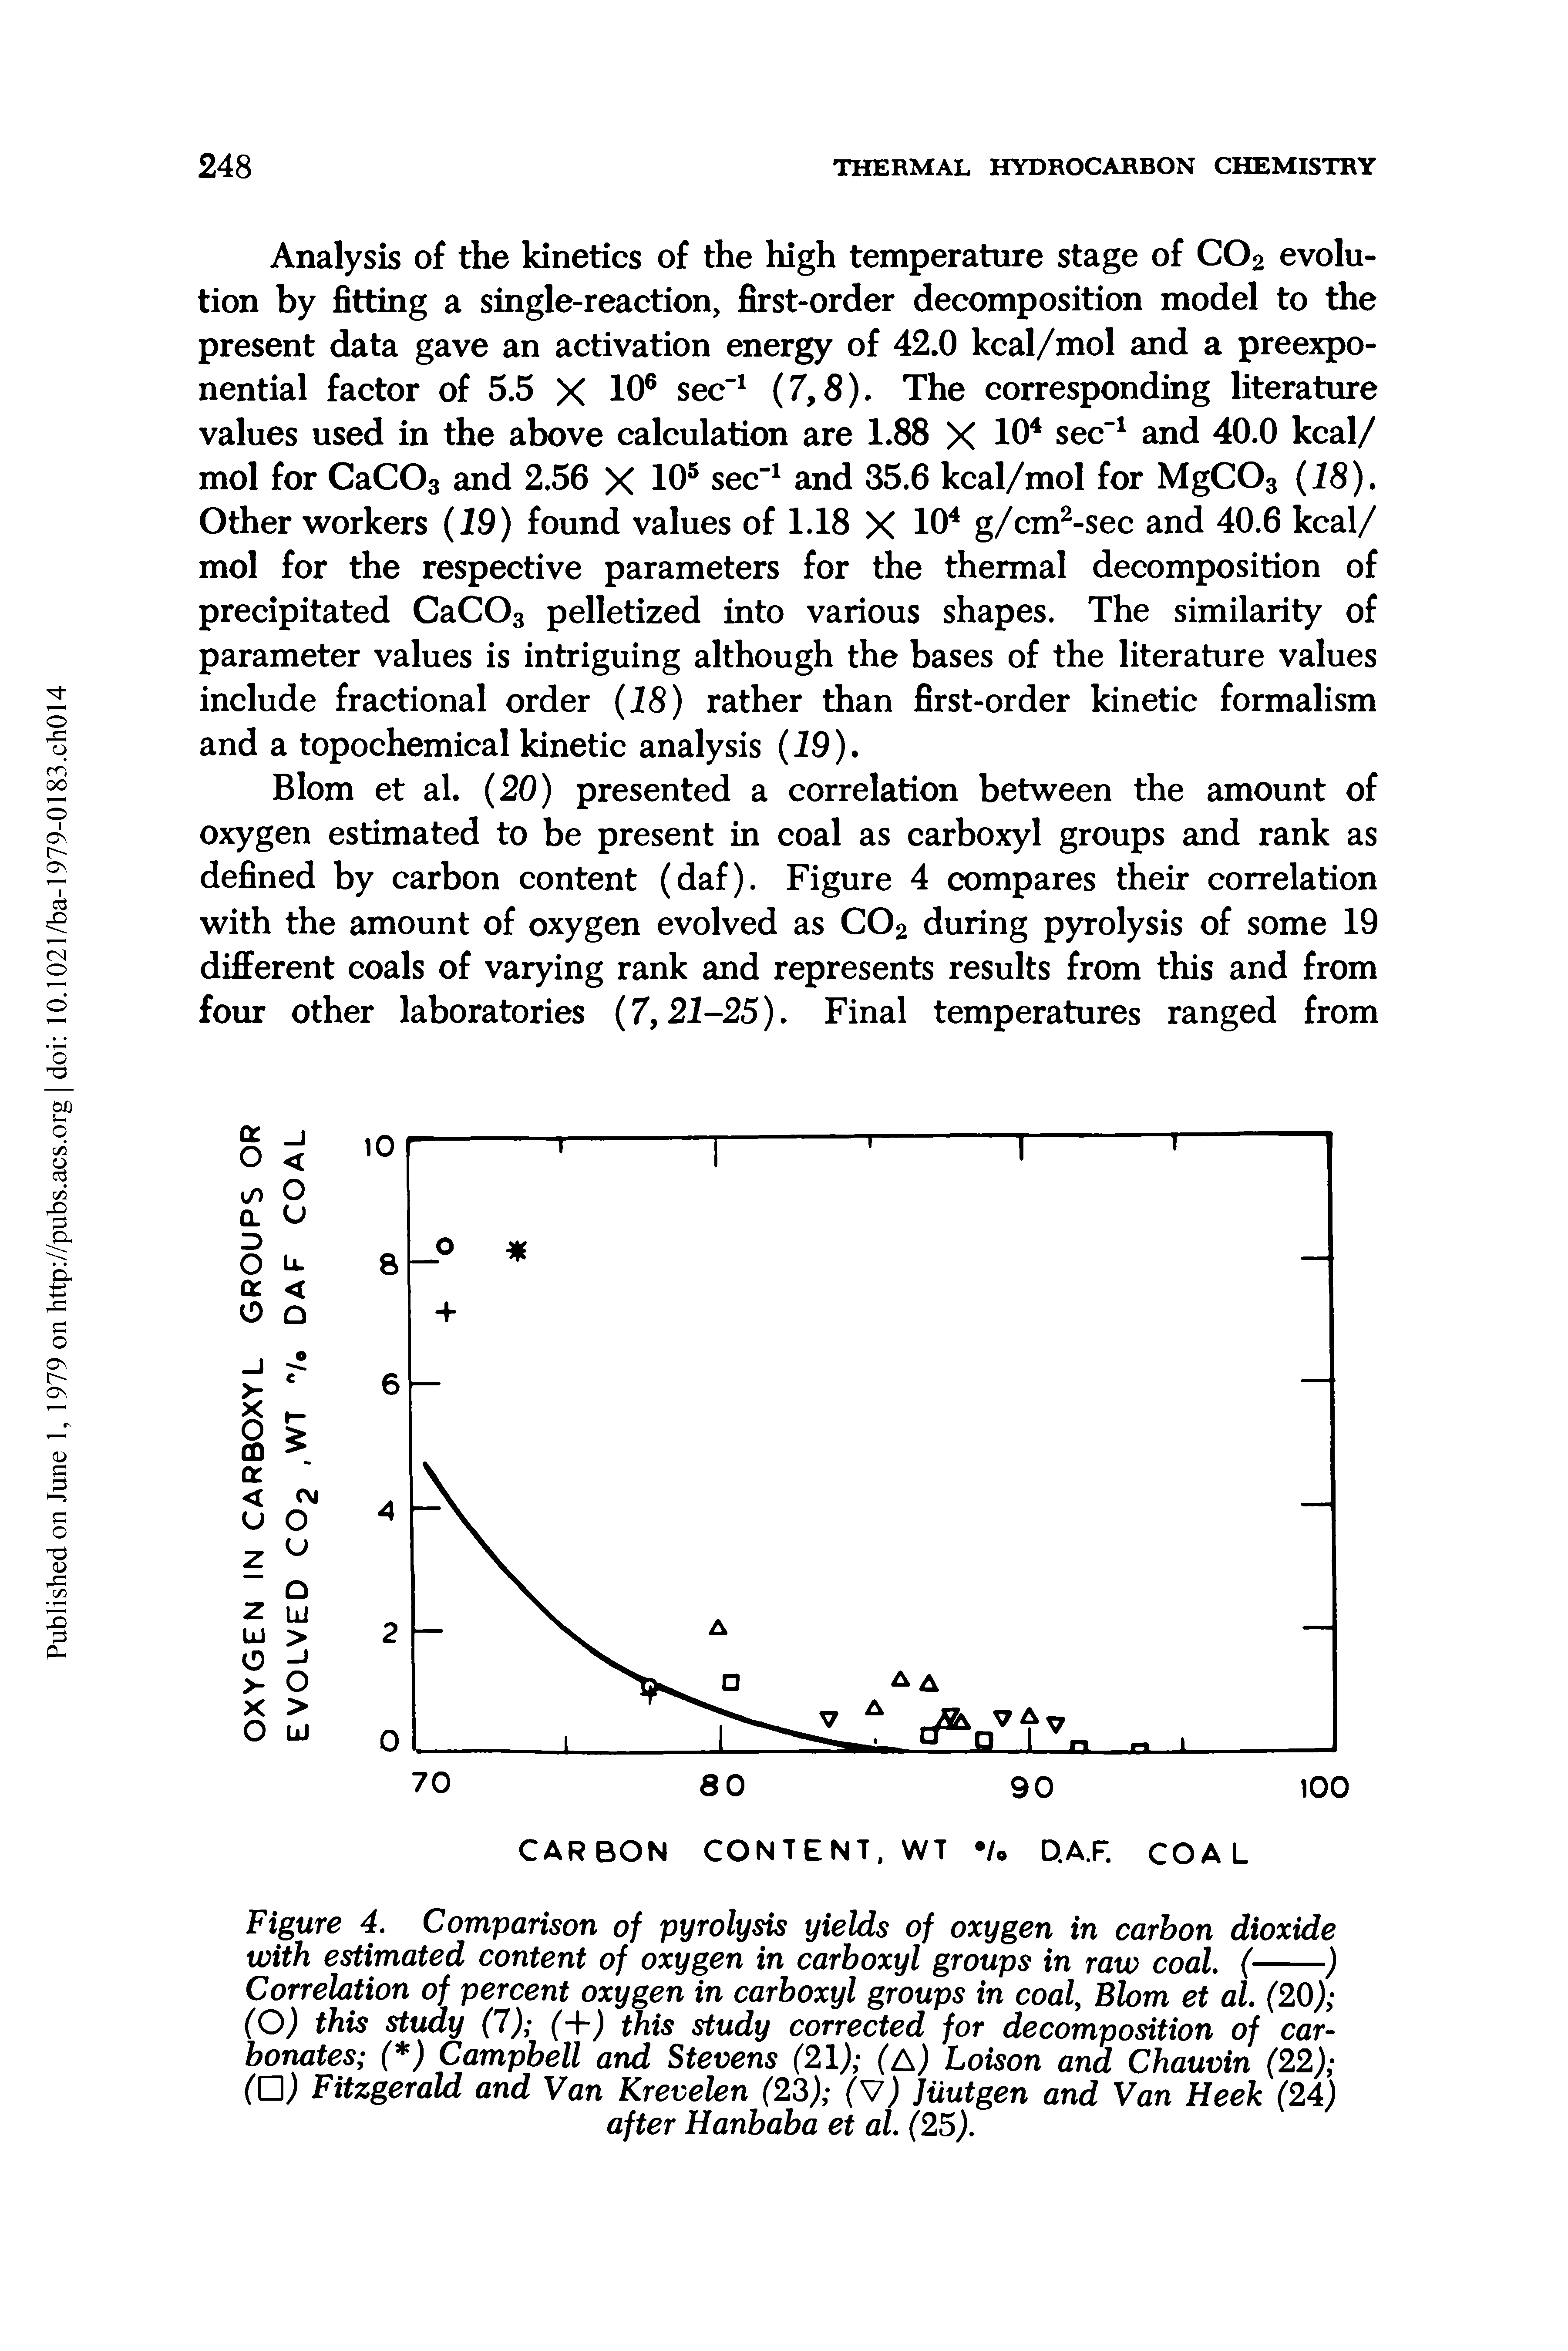 Figure 4. Comparison of pyrolysis yields of oxygen in carbon dioxide...